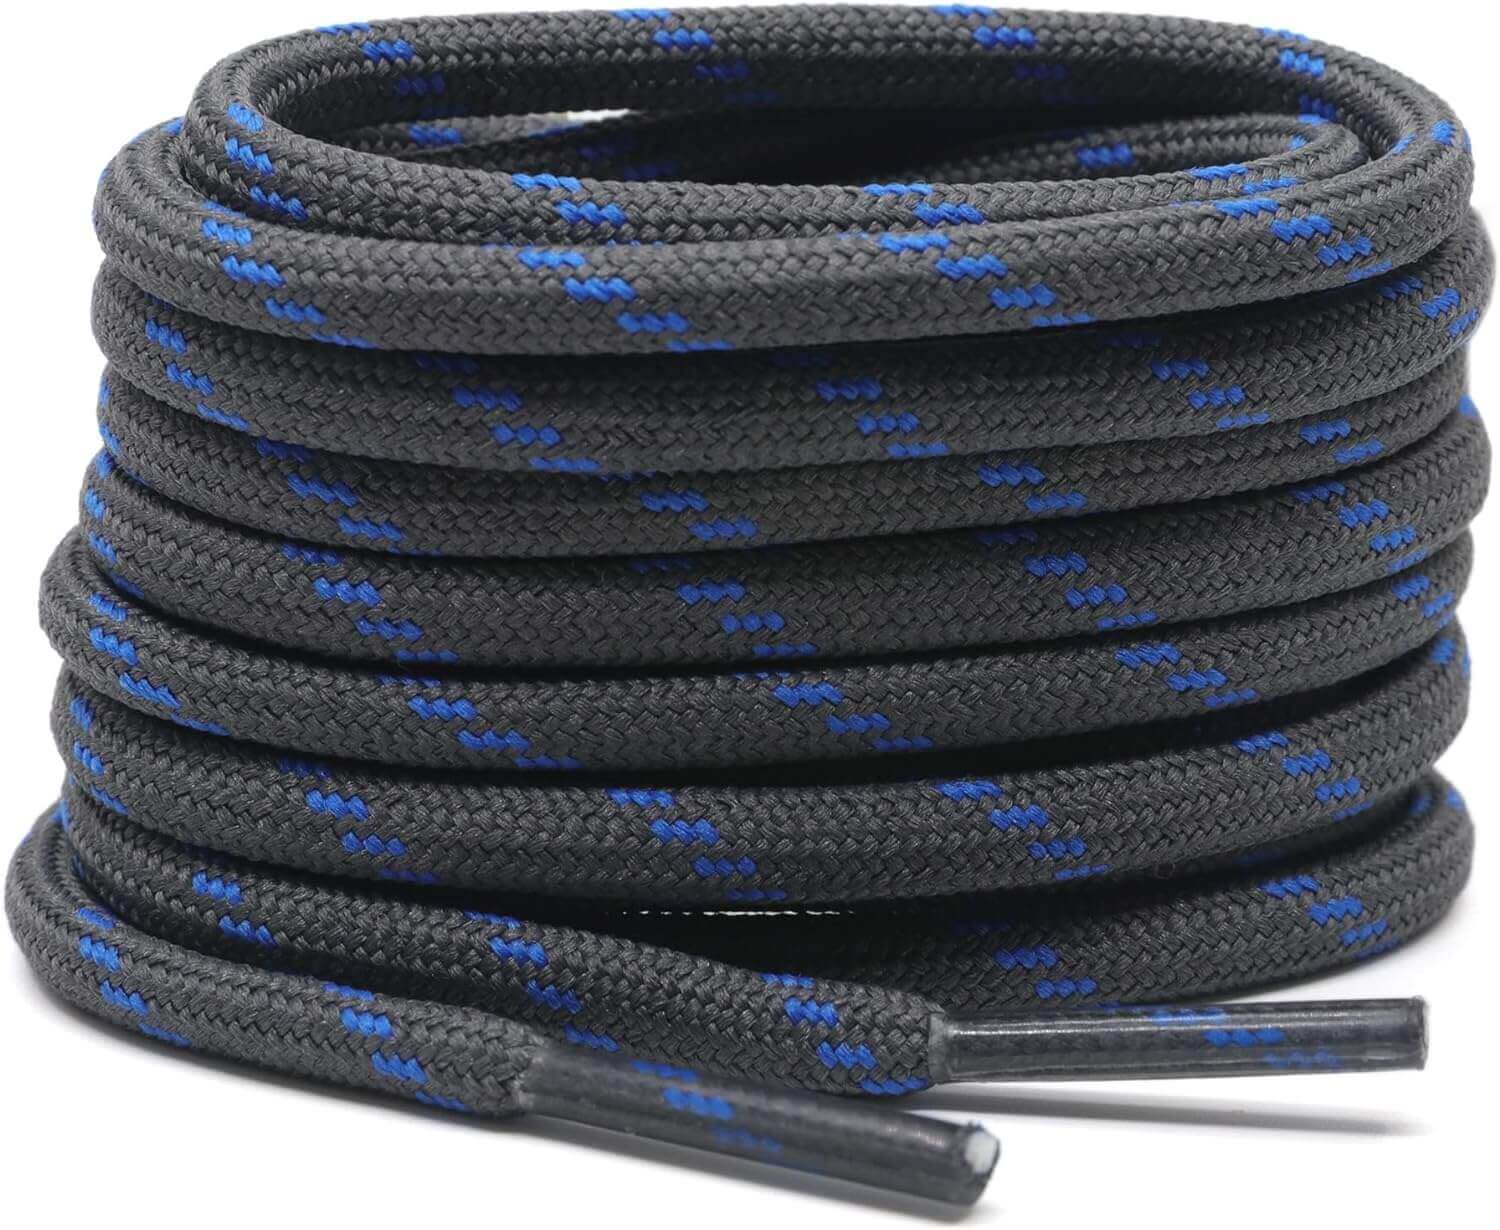 Shop The Latest >2 Pair Work Boot Laces - Hiking, Walking, Shoelaces > *Only $14.84*> From The Top Brand > *DELELEl* > Shop Now and Get Free Shipping On Orders Over $45.00 >*Shop Earth Foot*